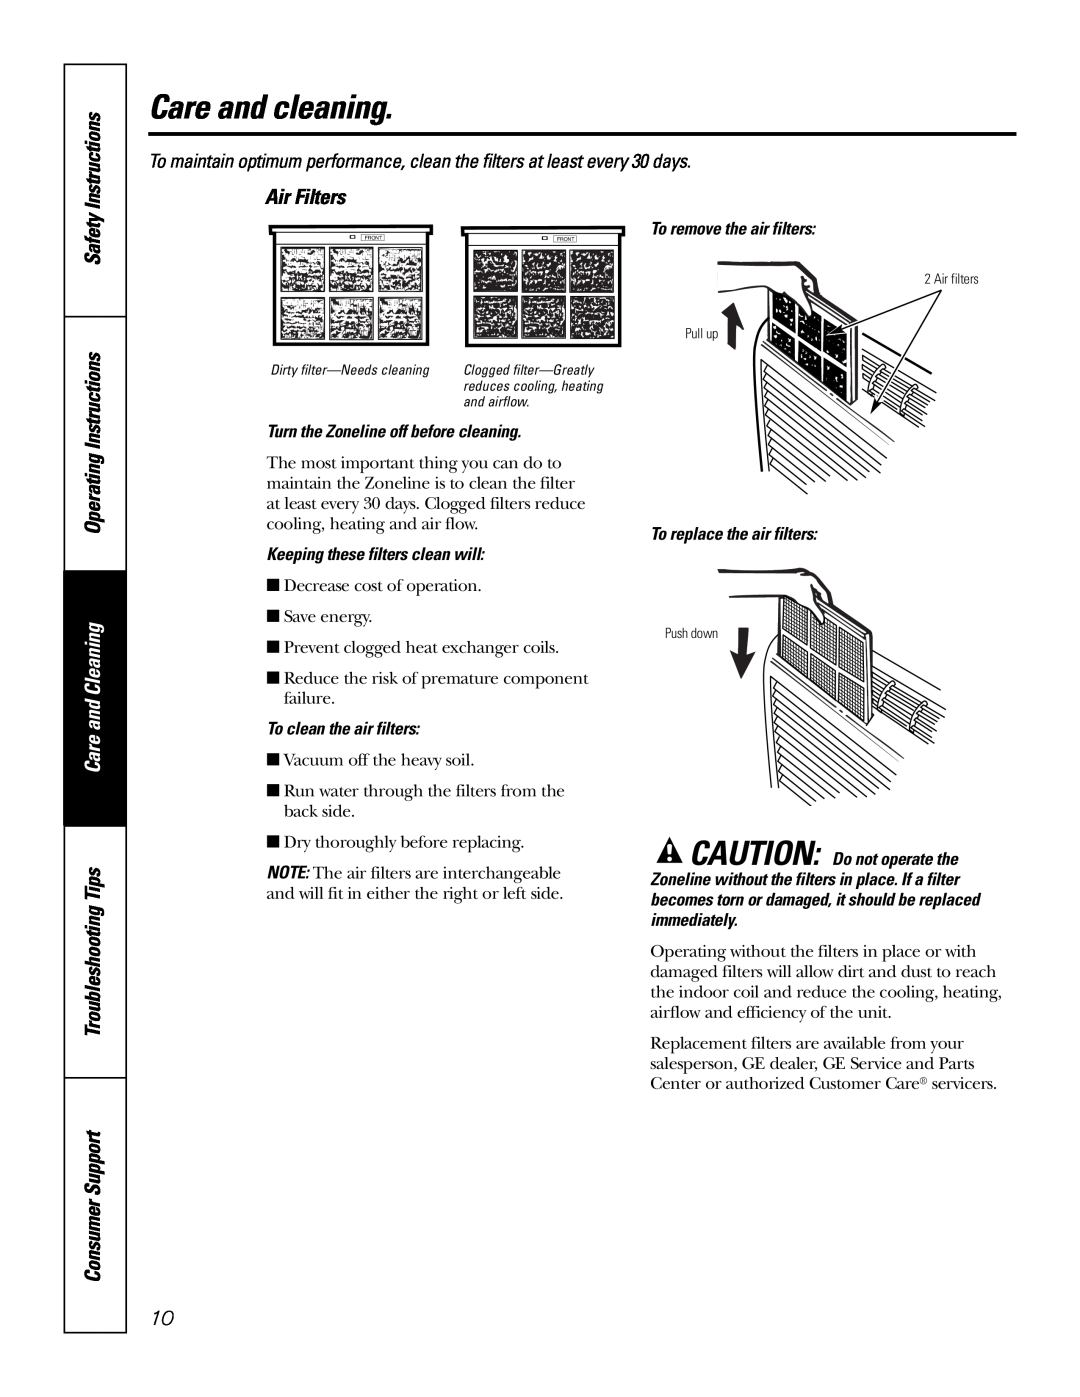 GE 3900 Safety Operating Instructions, Care and Cleaning, Air Filters, Care and cleaning, To clean the air filters 